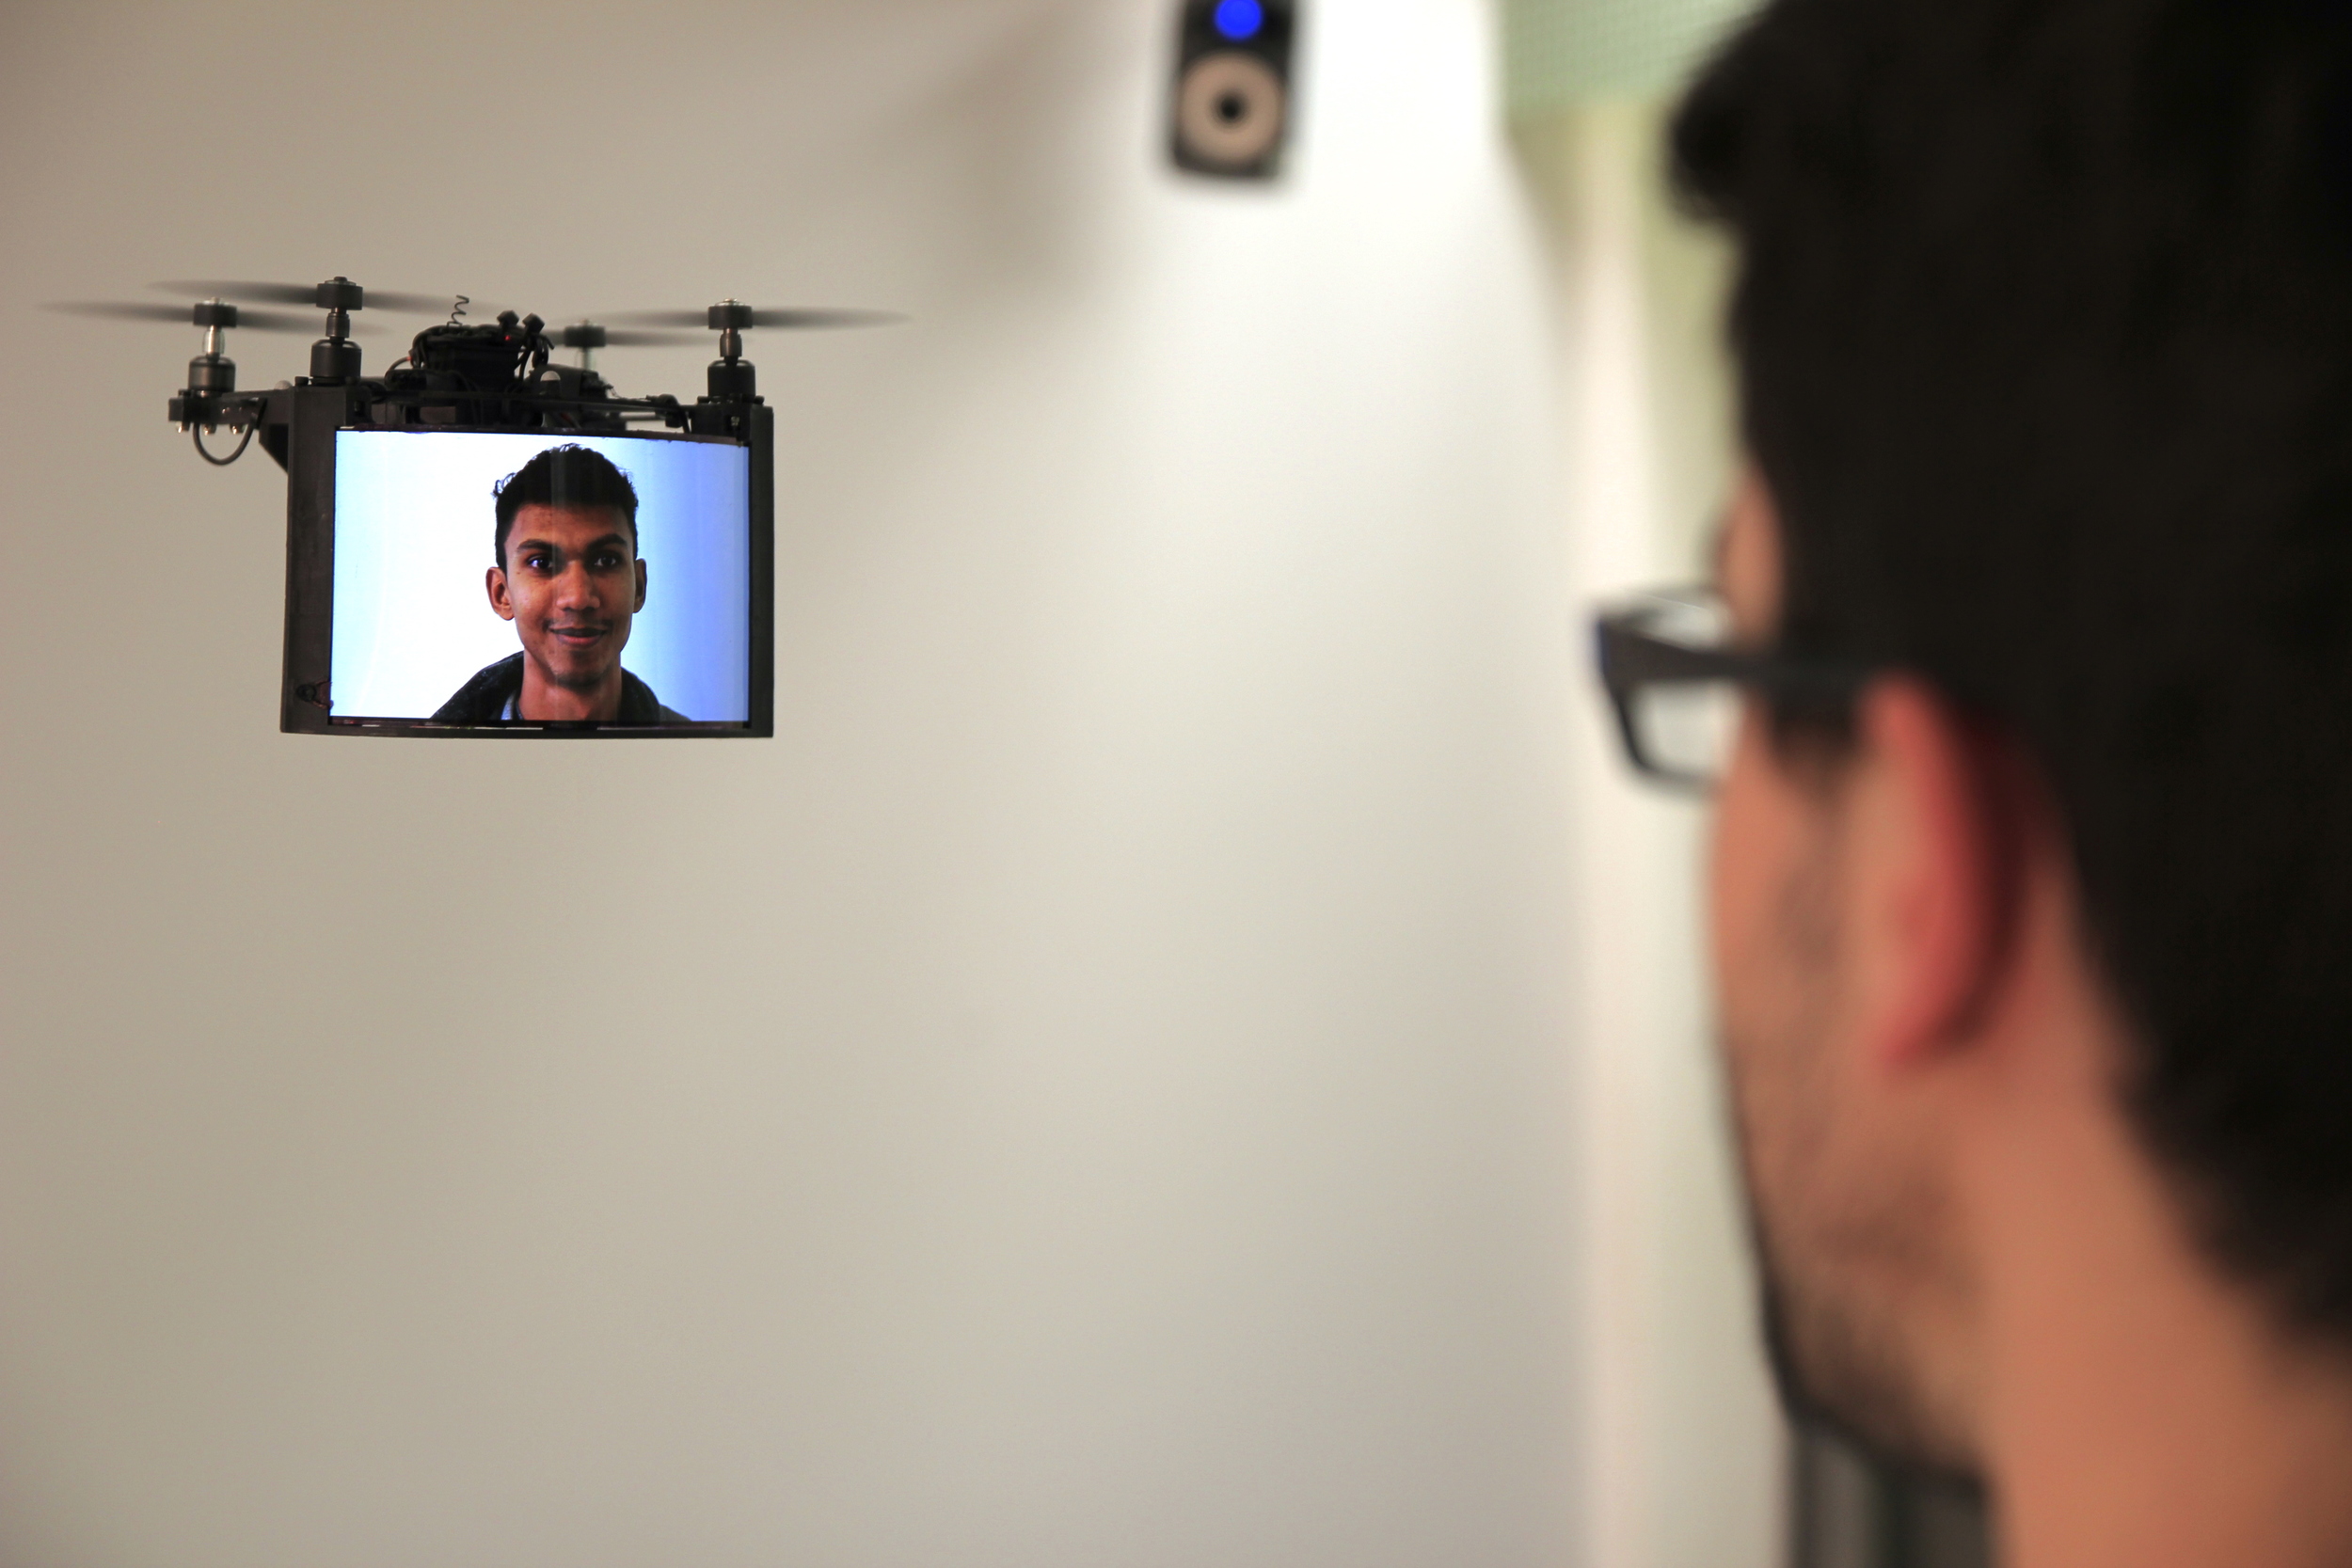 BitDrones (2015): TelePresence through a DisplayDrone with Skype.